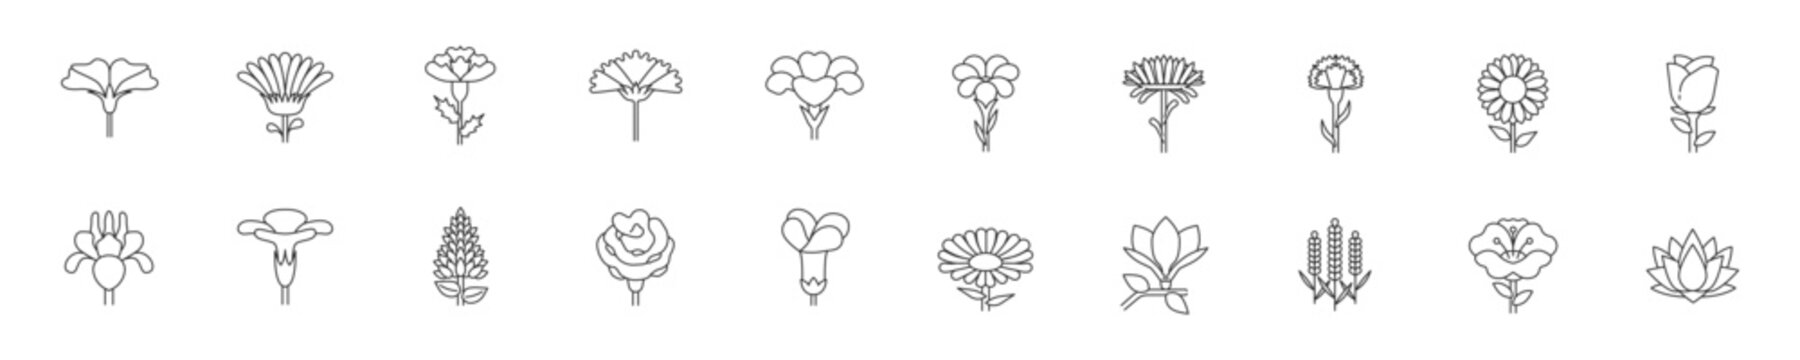 Set of different flowers icon set. Premium quality objects. Editable strokes. Vector.